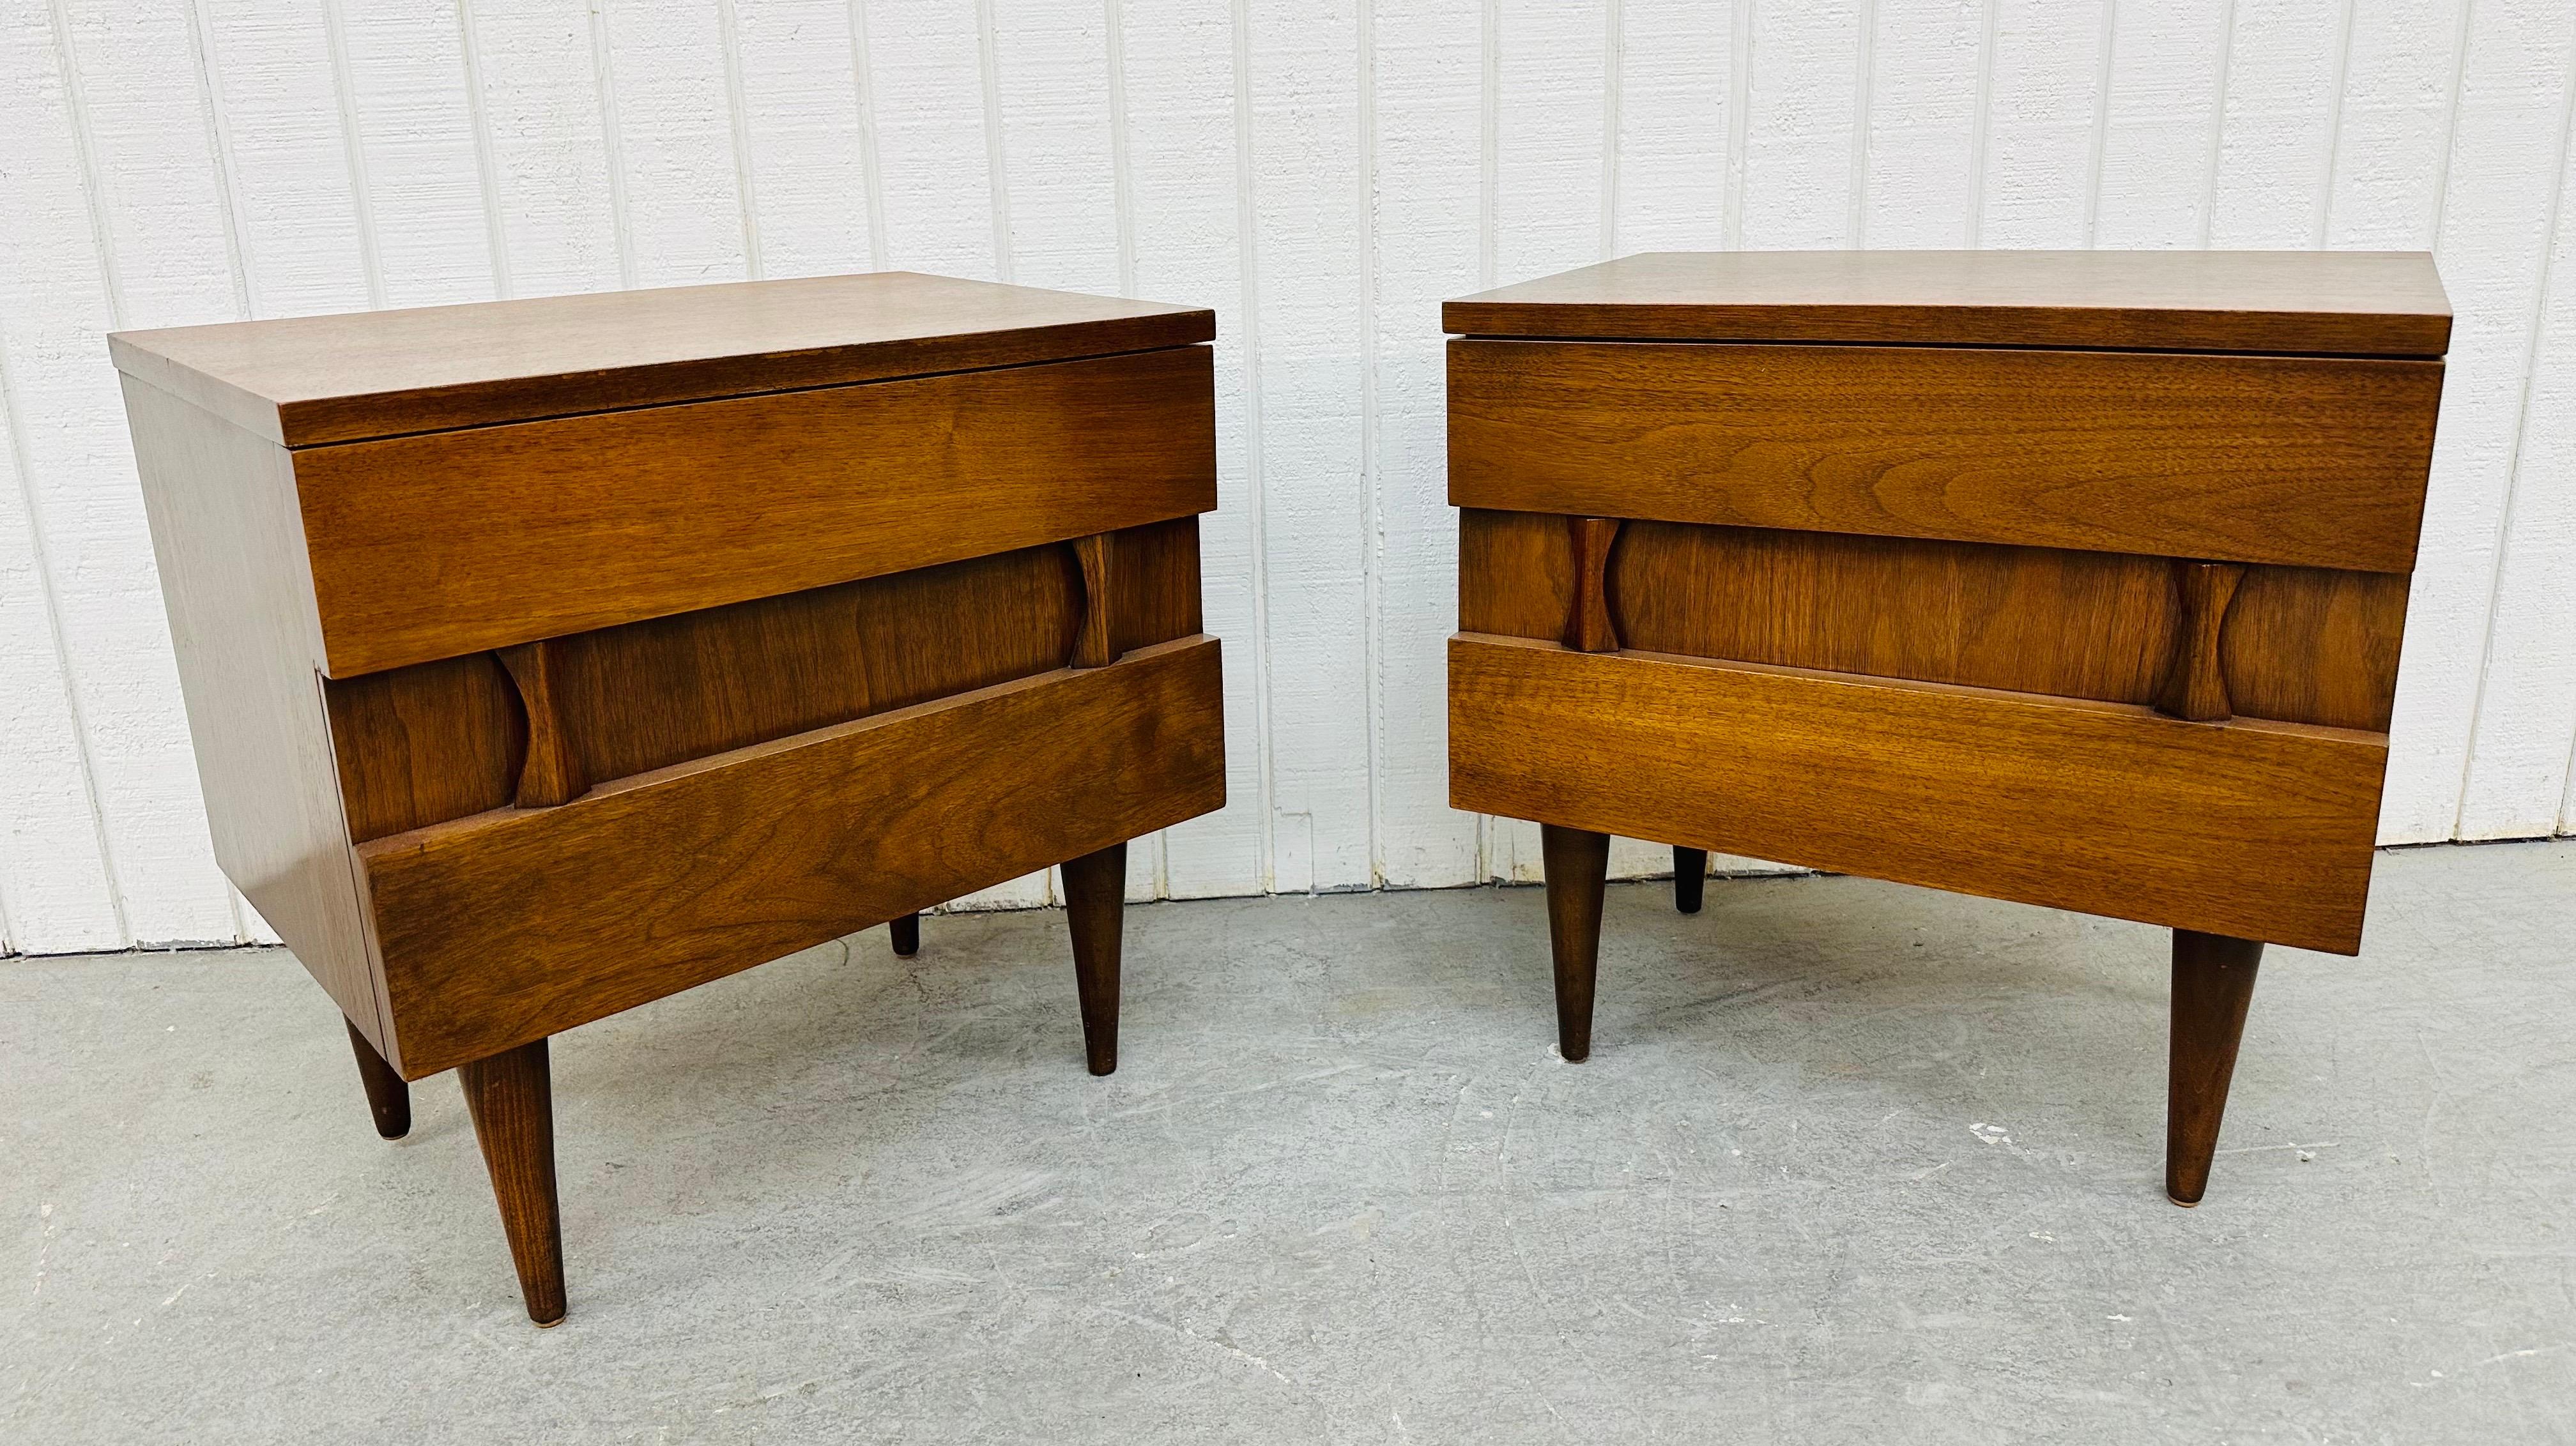 This listing is for a pair of Mid-Century Modern American of Martinsville Walnut Nightstands. Featuring a straight line design, brutalist front design, two drawers for storage, modern legs, and a beautiful walnut finish. This is an exceptional